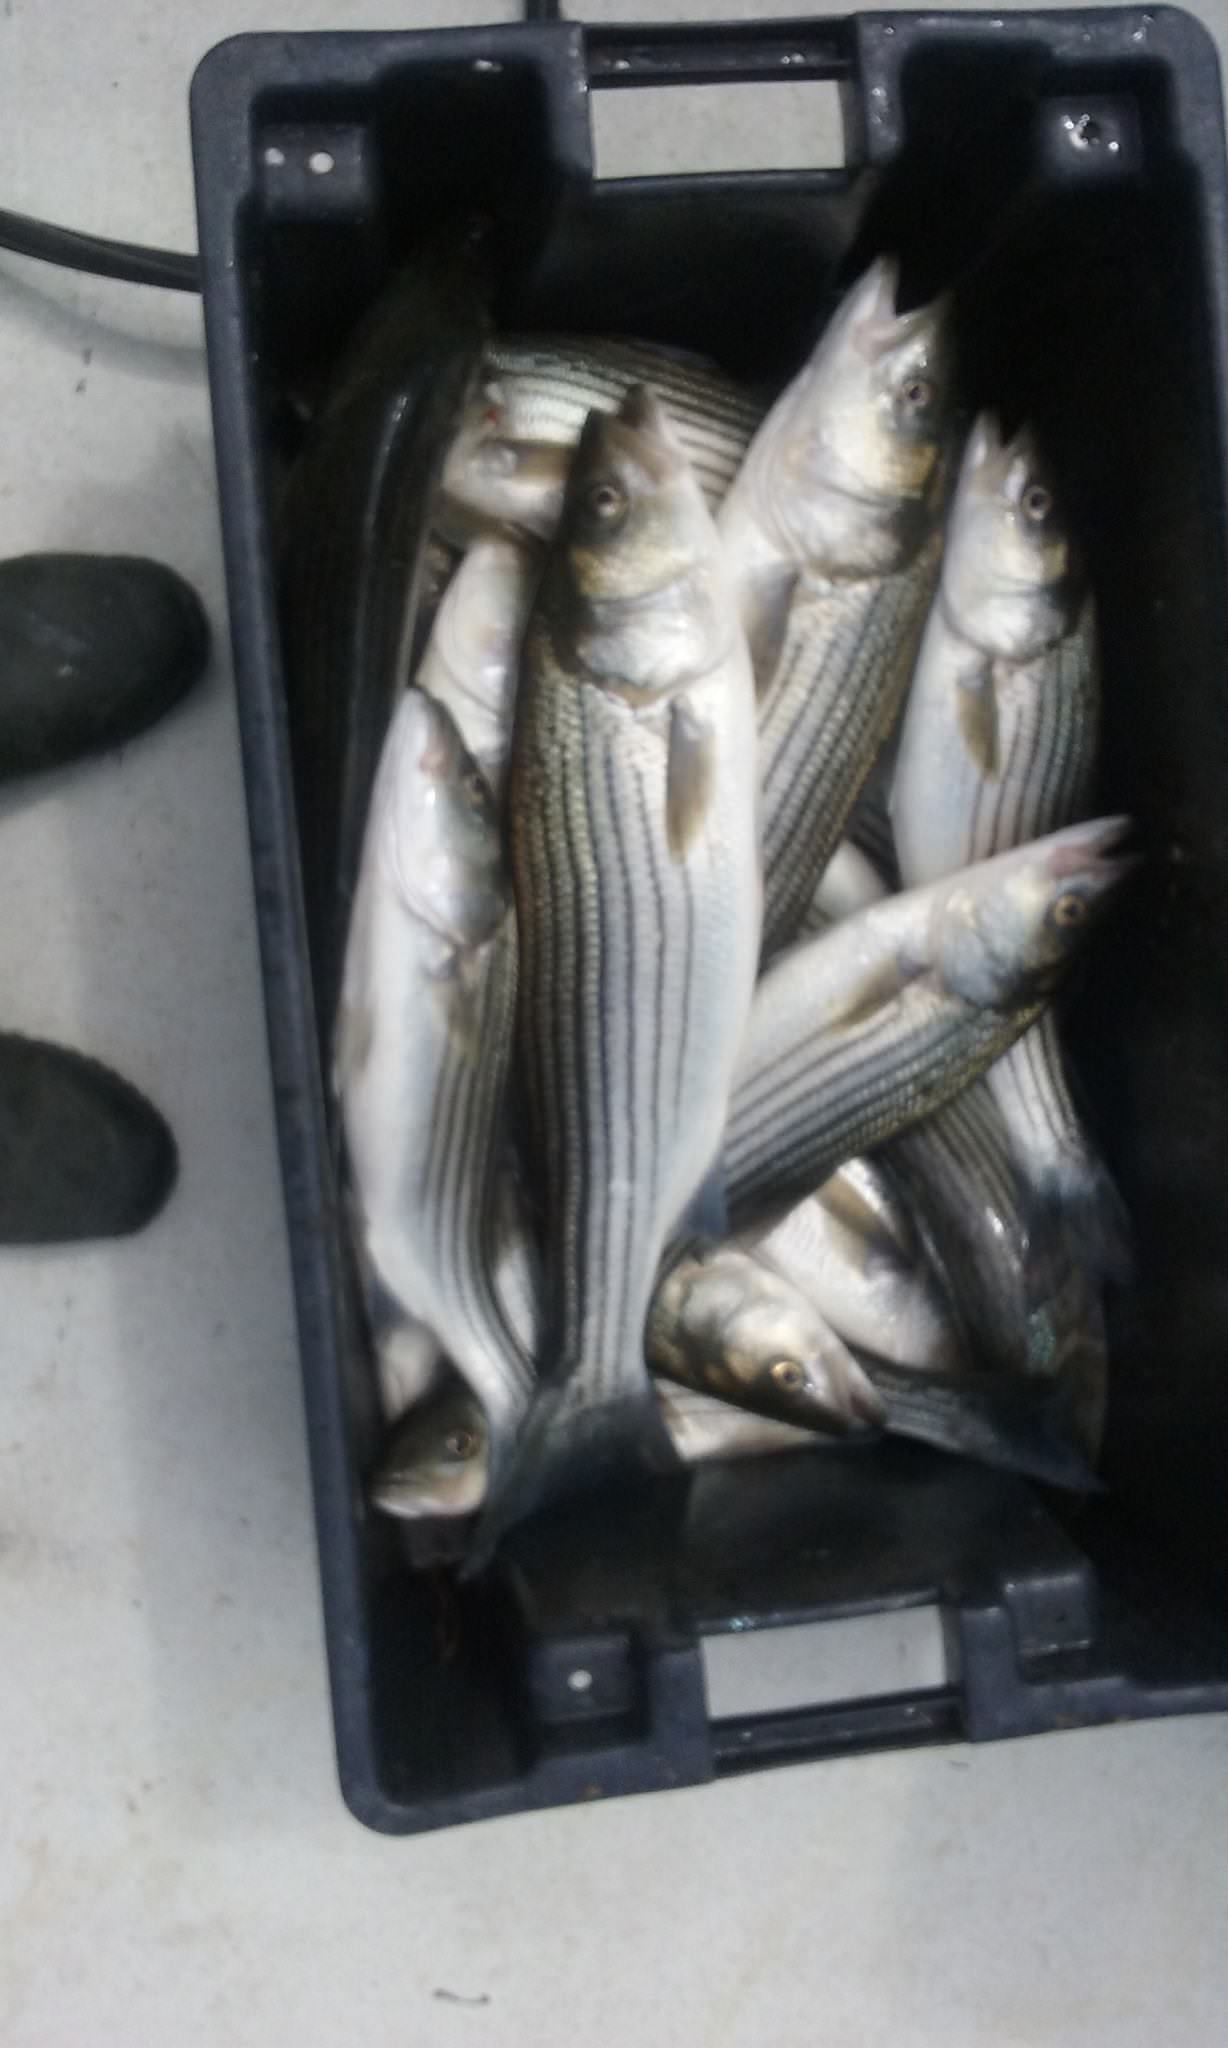 This Is What A Limit Of Striped Bass Looks Like!